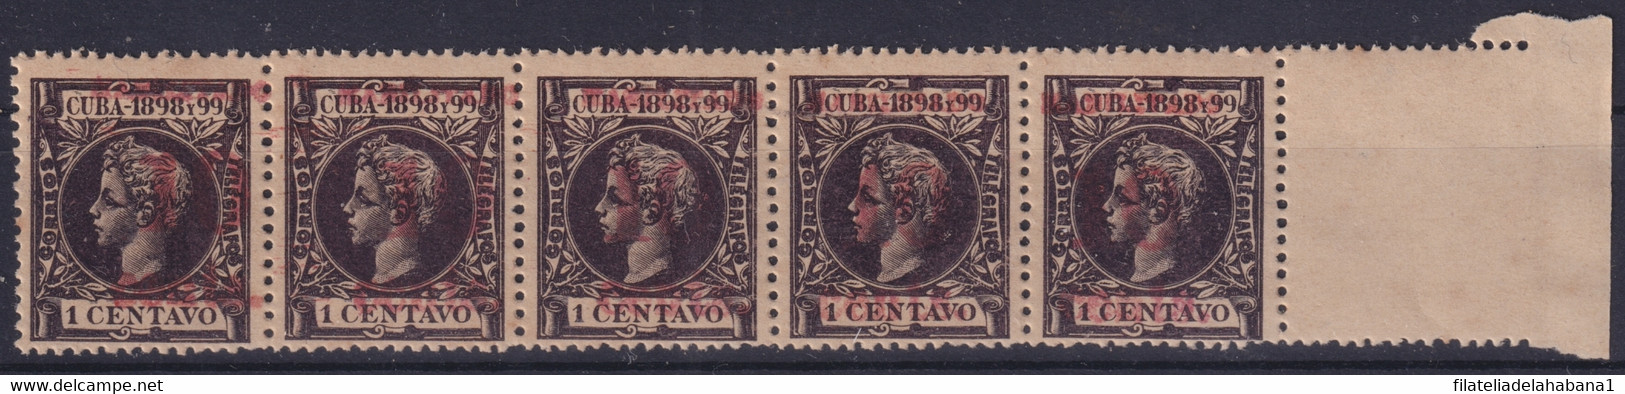 1899-486 CUBA 1899 10c S. 1c US OCCUPATION 4th ISSUE COMPLETE TRIP PHILATELIC FORGERY. - Unused Stamps